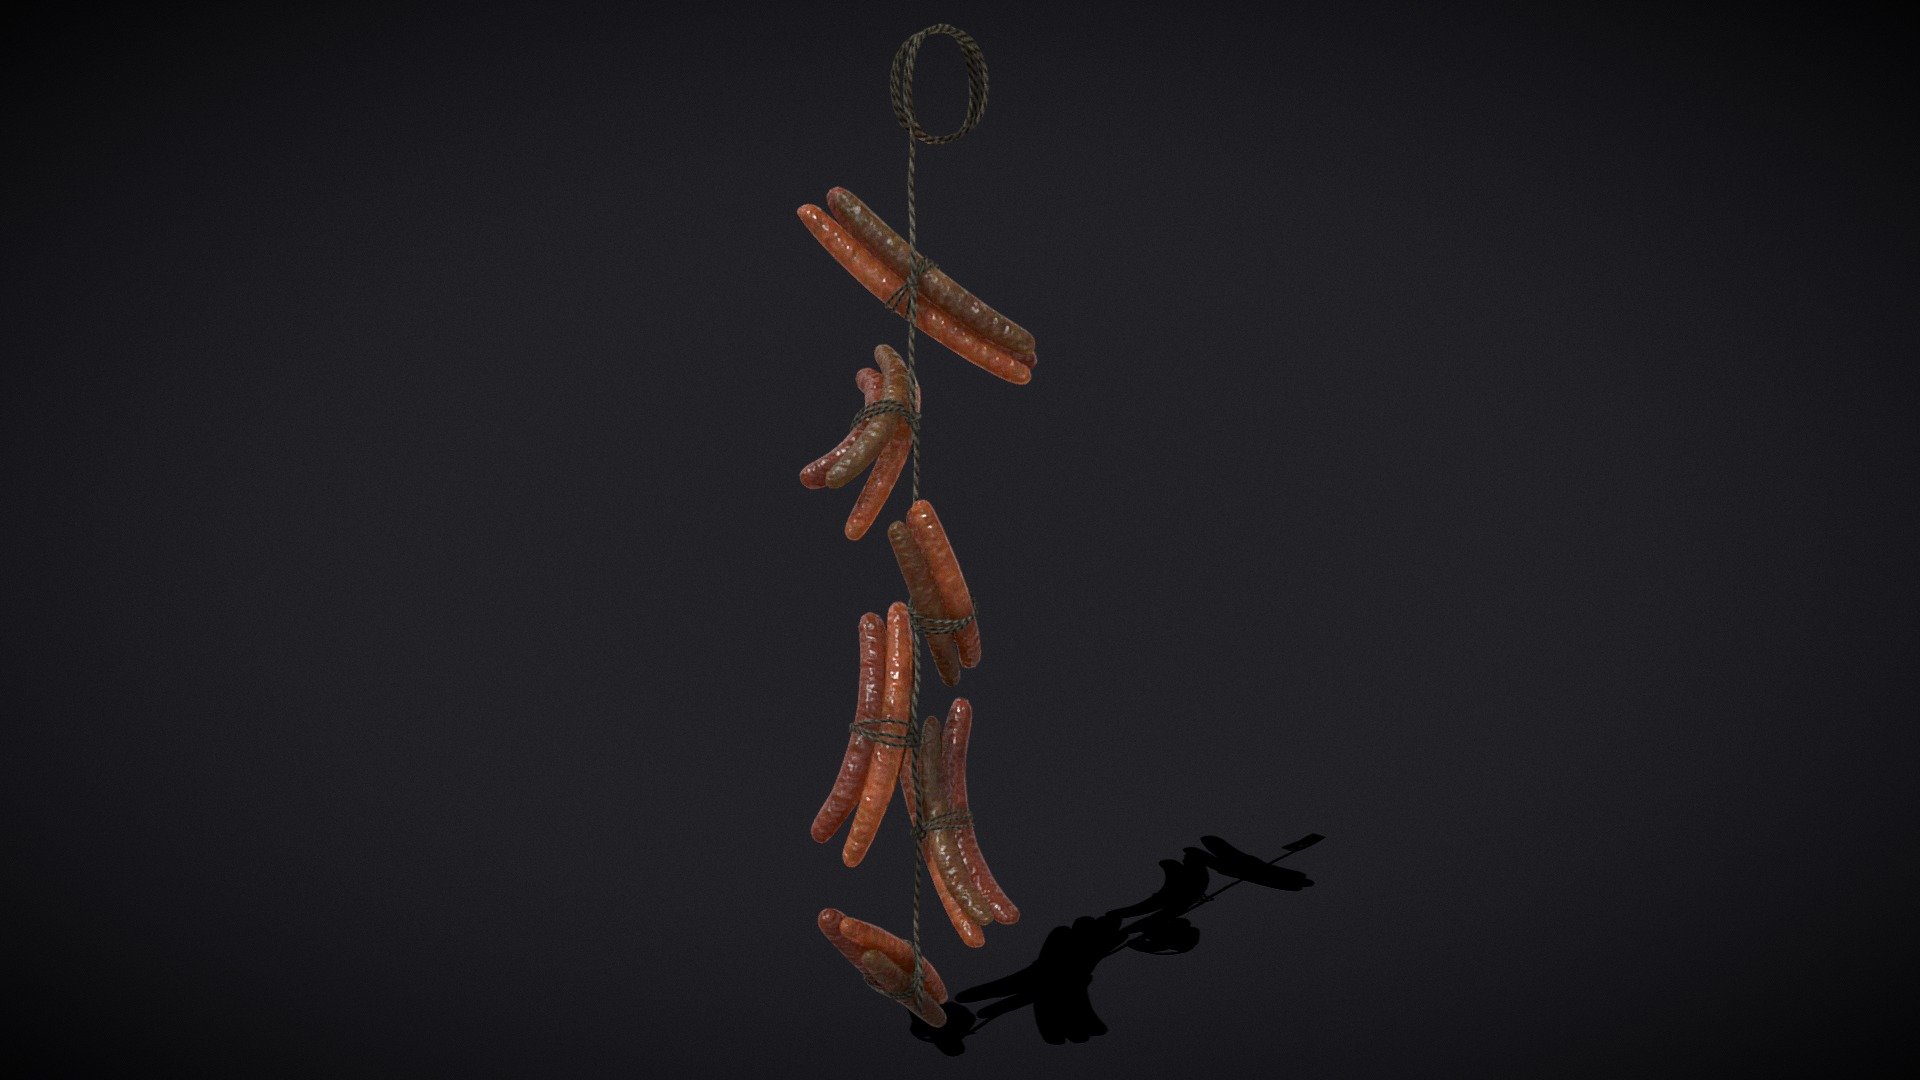 Hanging Smoked Sausages
VR / AR / Low-poly
PBR approved
Geometry Polygon mesh
Polygons 12,054
Vertices 12,037
Textures 4K PNG
Materials 1 - Hanging Smoked Sausages - Buy Royalty Free 3D model by GetDeadEntertainment 3d model